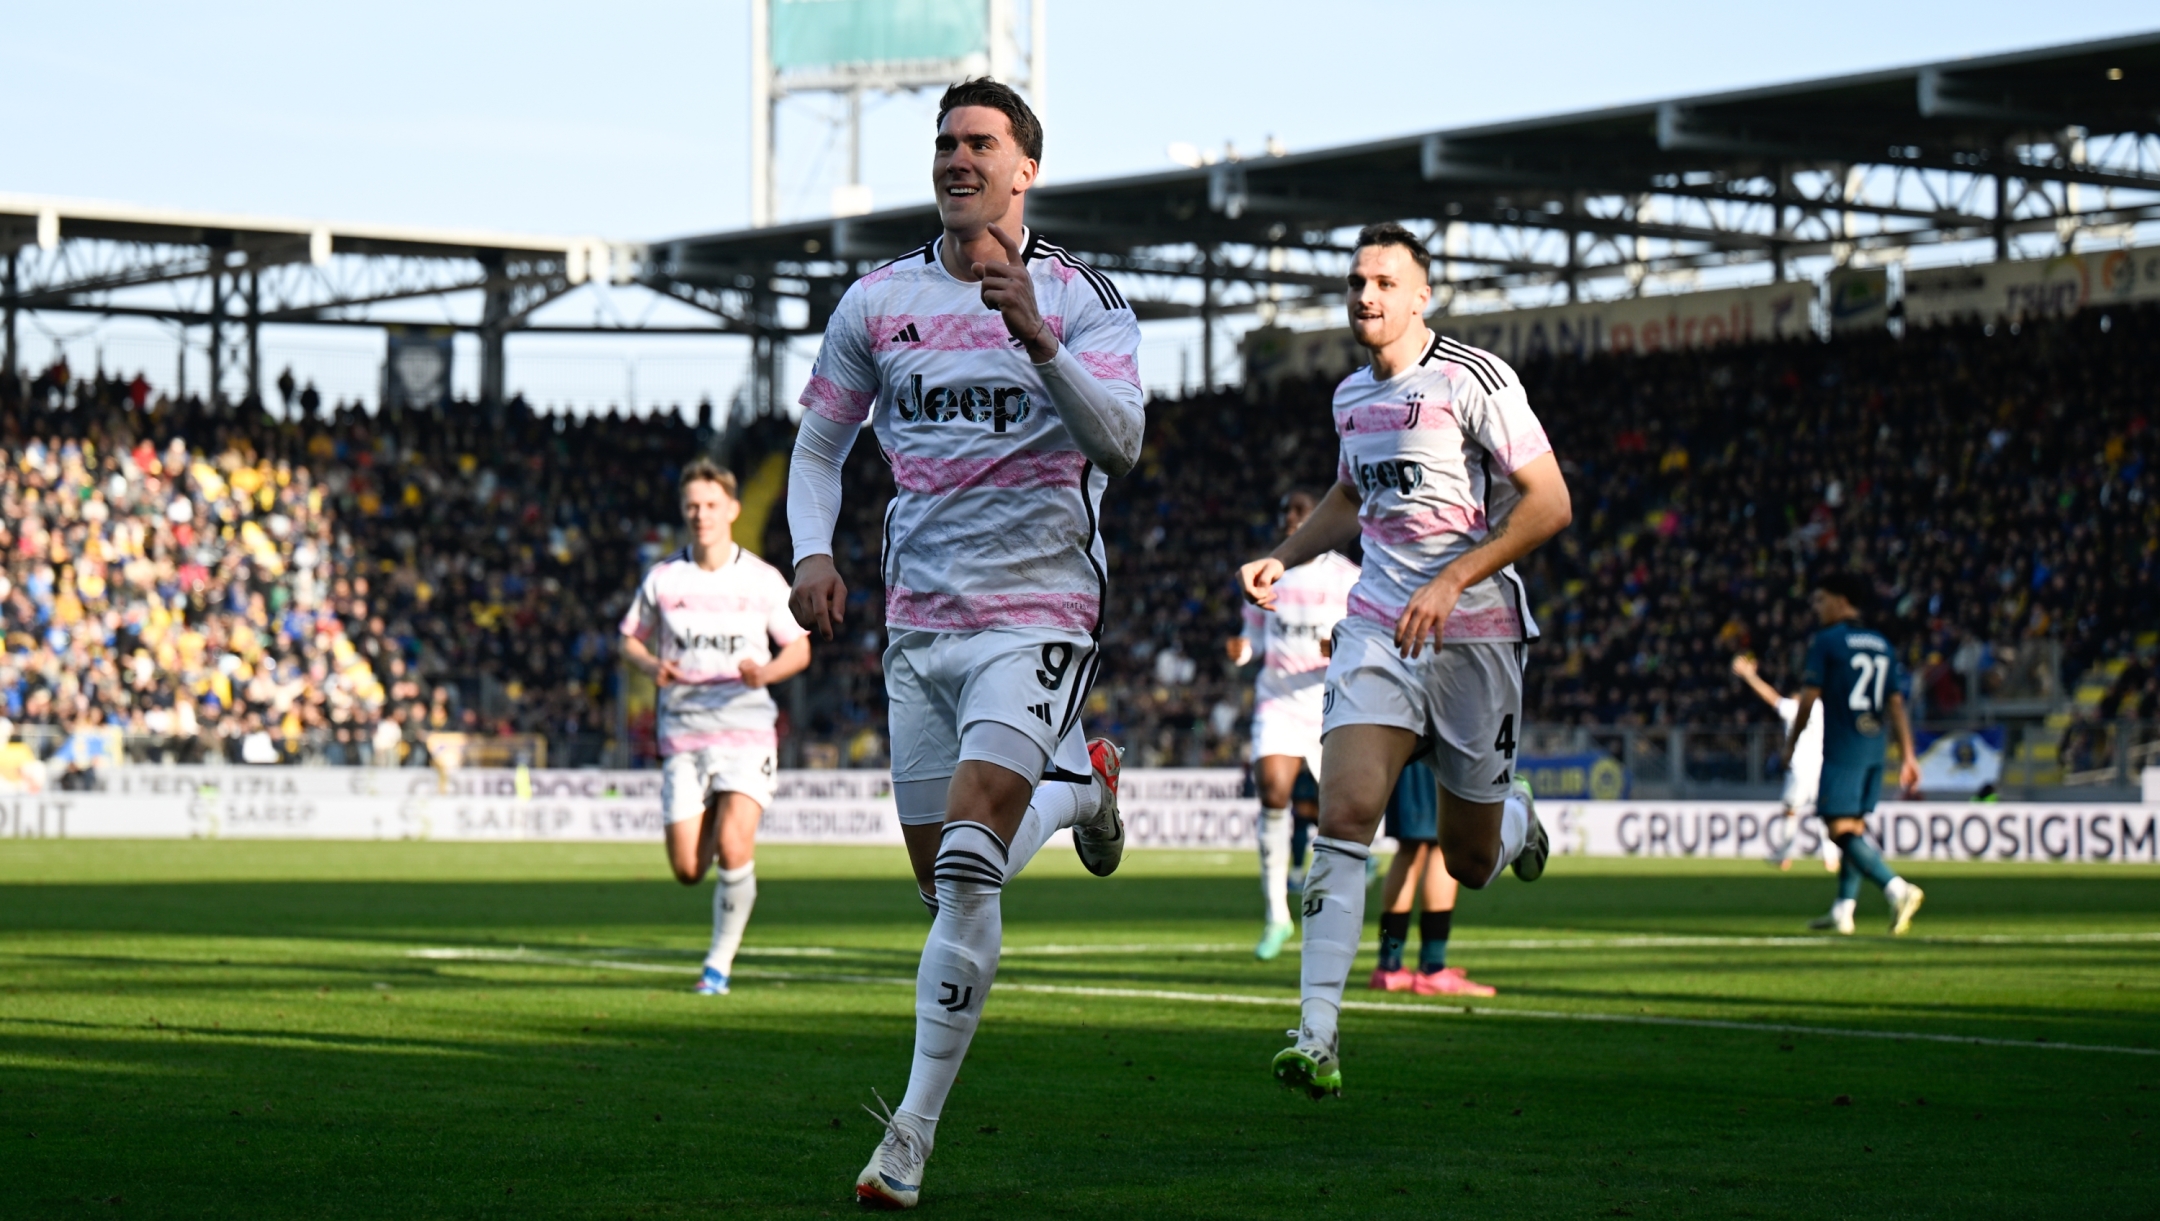 FROSINONE, ITALY - DECEMBER 23: Dusan Vlahovic of Juventus celebrates 1-2 goal during the Serie A TIM match between Frosinone Calcio and Juventus at Stadio Benito Stirpe on December 23, 2023 in Frosinone, Italy. (Photo by Daniele Badolato - Juventus FC/Juventus FC via Getty Images)